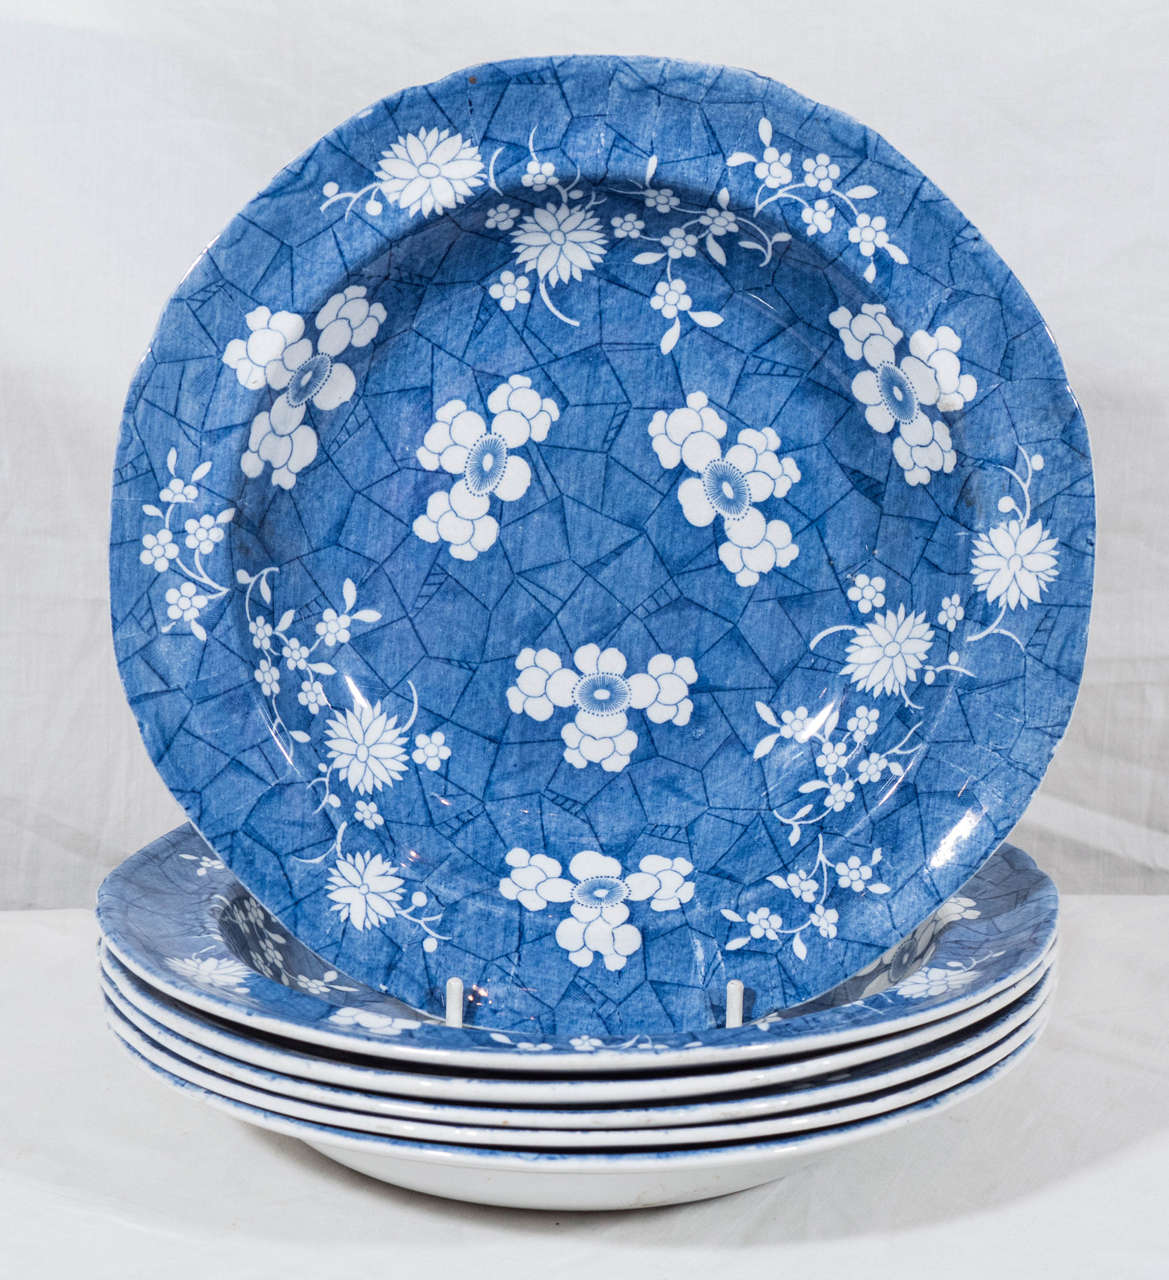 A set of a six Spode Blue and White soup dishes made in the first quarter of the 19th century and decorated in an overall pattern of hawthorne blossoms on a 